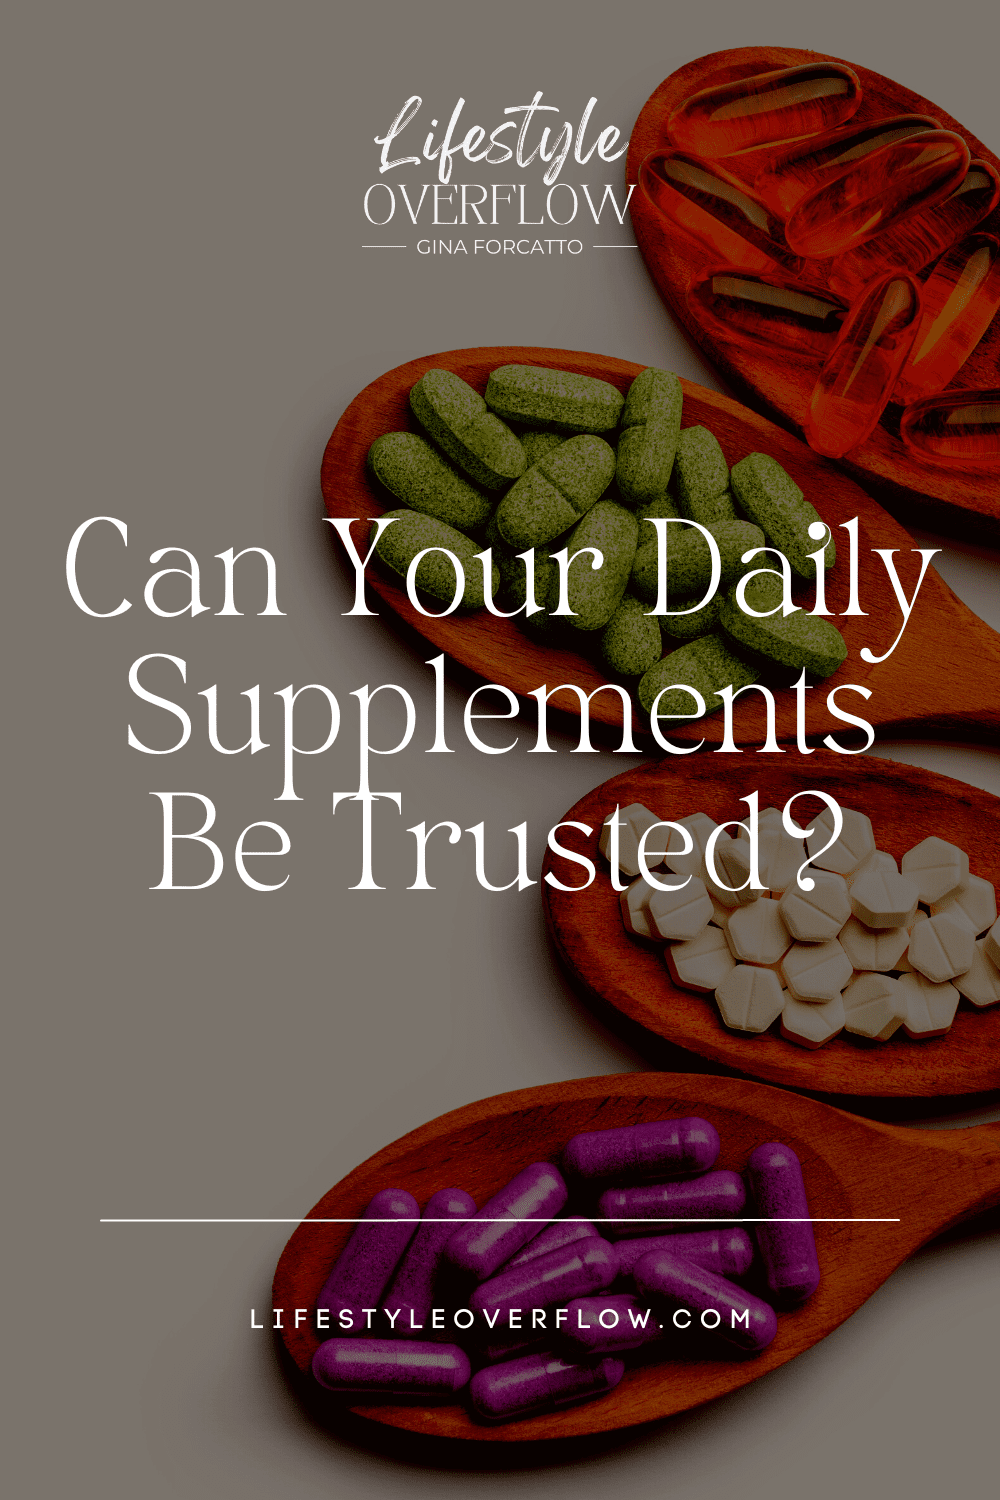 Can your daily supplements be trusted? Blog post by Gina Forcatto | image of spoons with supplements in the background.